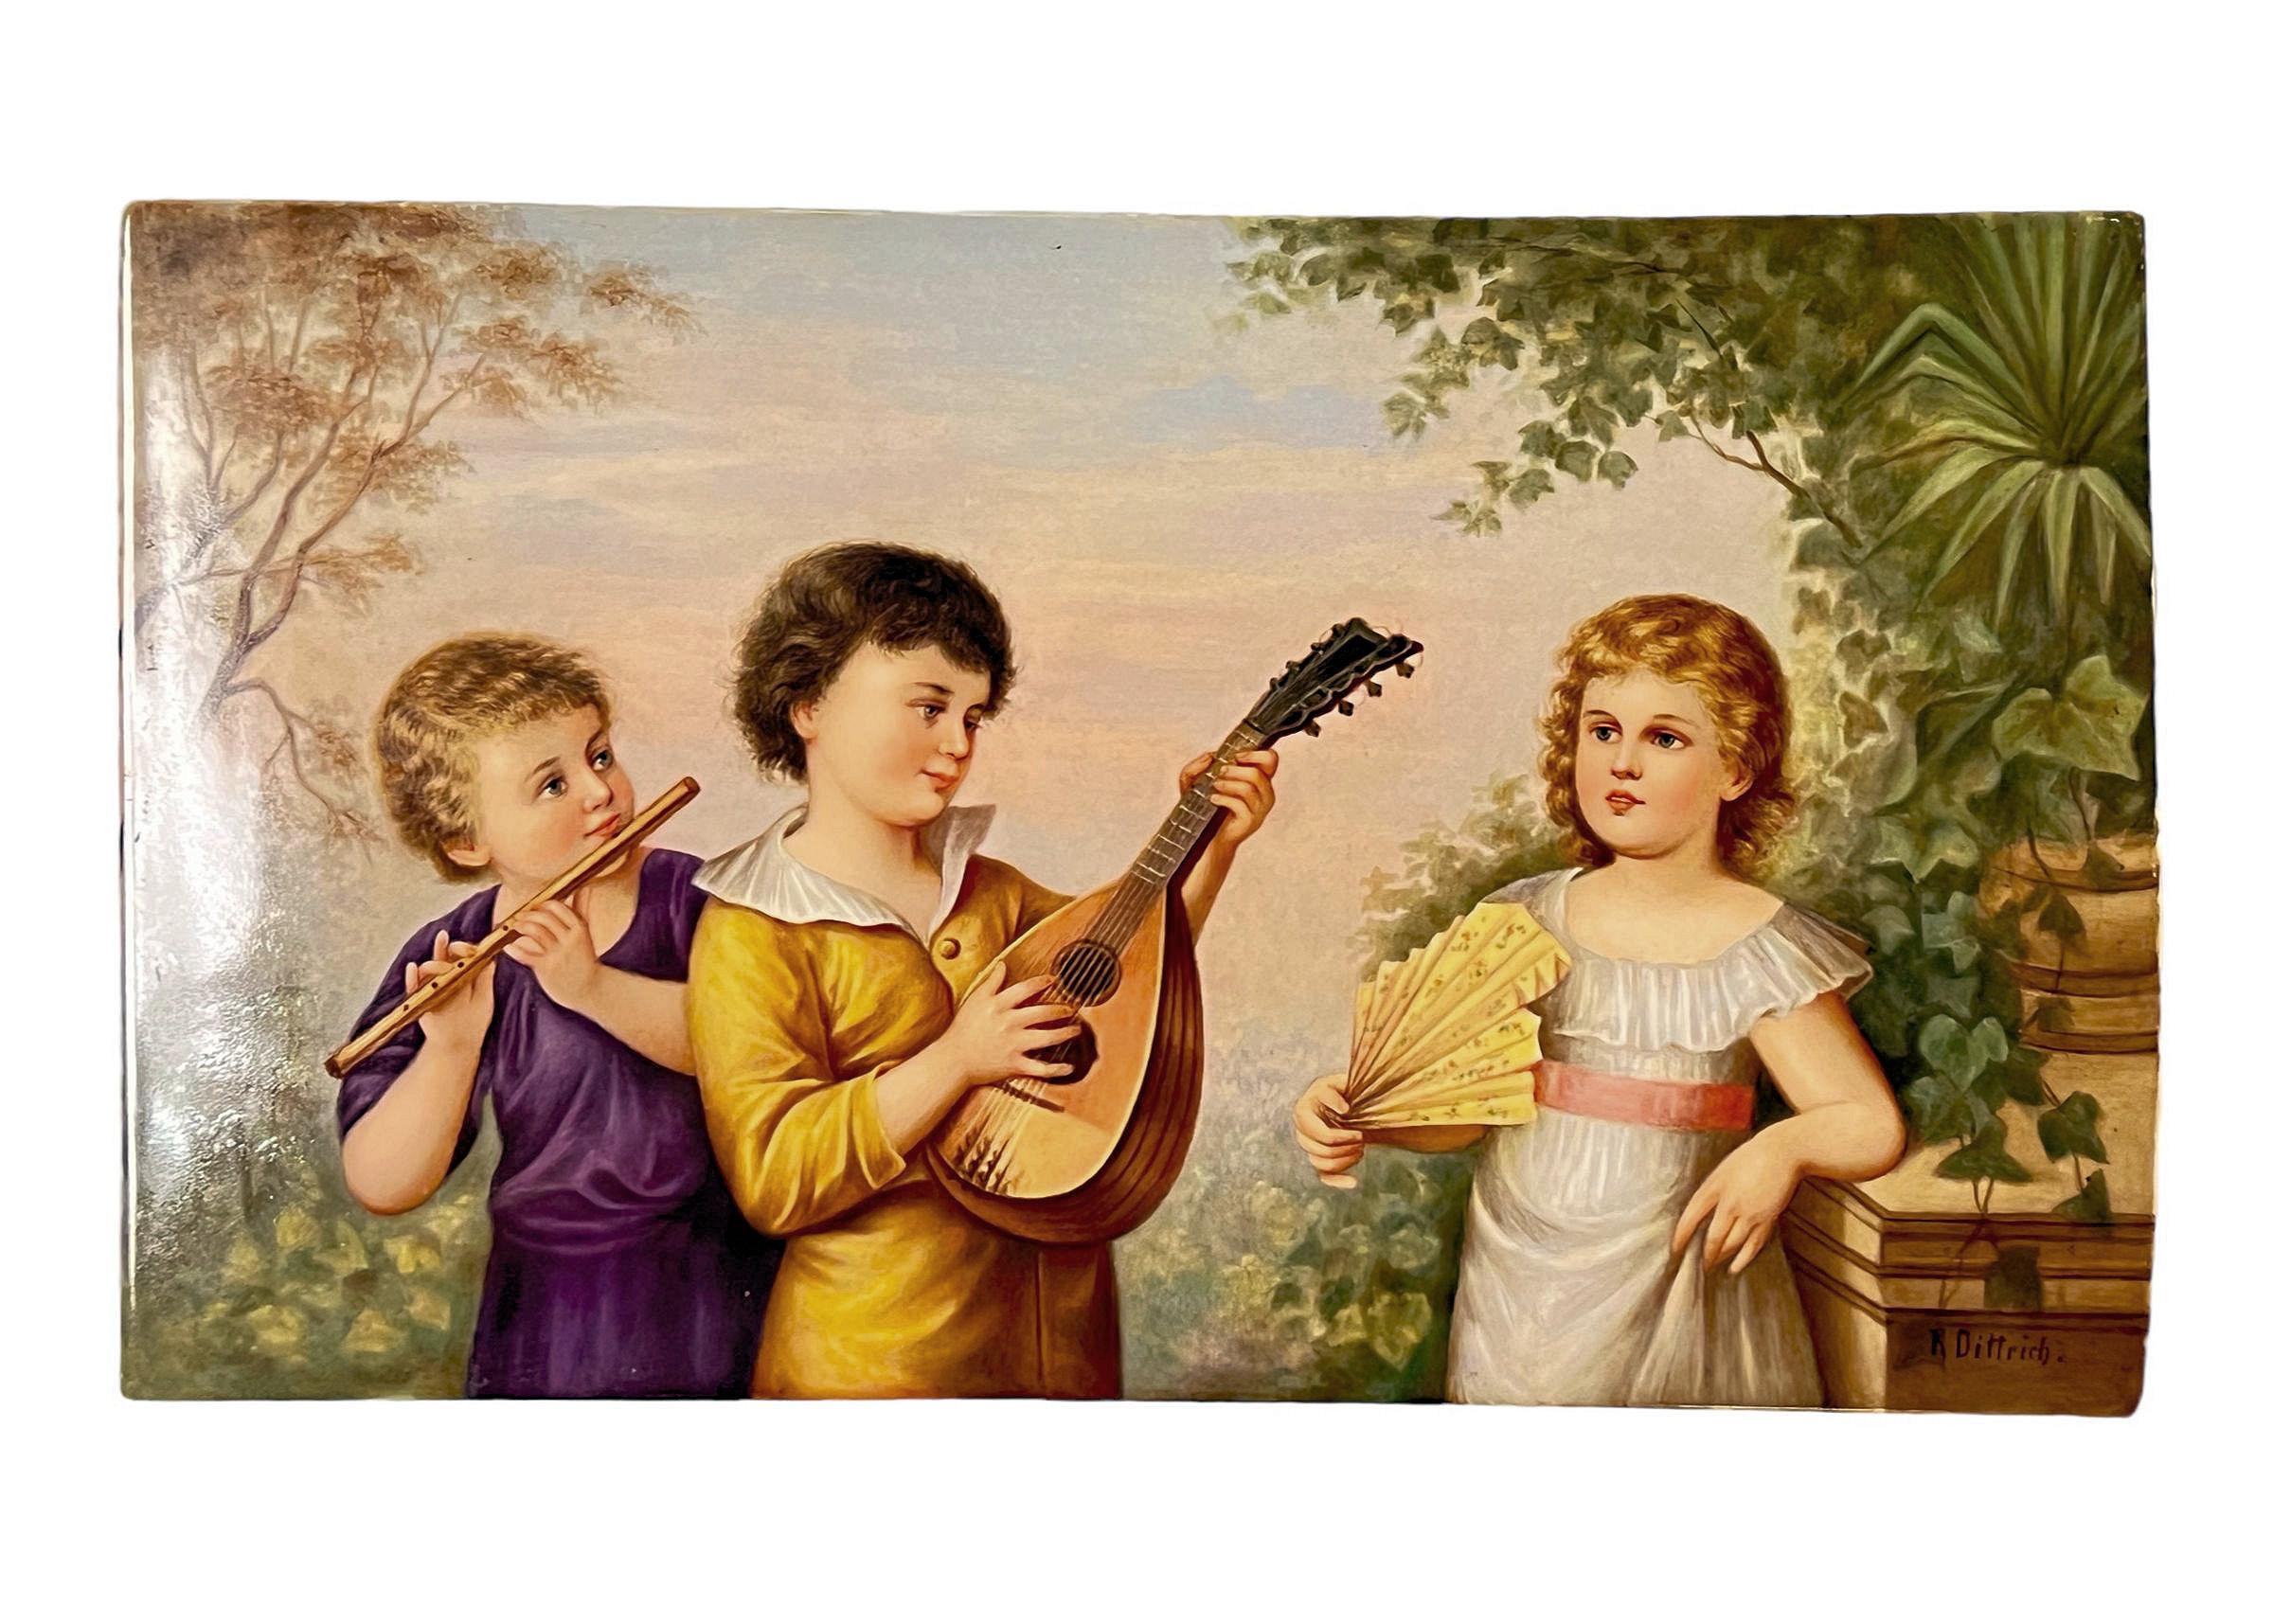 Large 19th century KPM plaques hand-painted by Dittrich after the original paintings by the Czech master, Franz Lefler (1831-1898), depicting children singing and playing string instruments.  Measures:  13 by 7 3/4 and 13 1/4 by 7 7/8 inches.
Rears